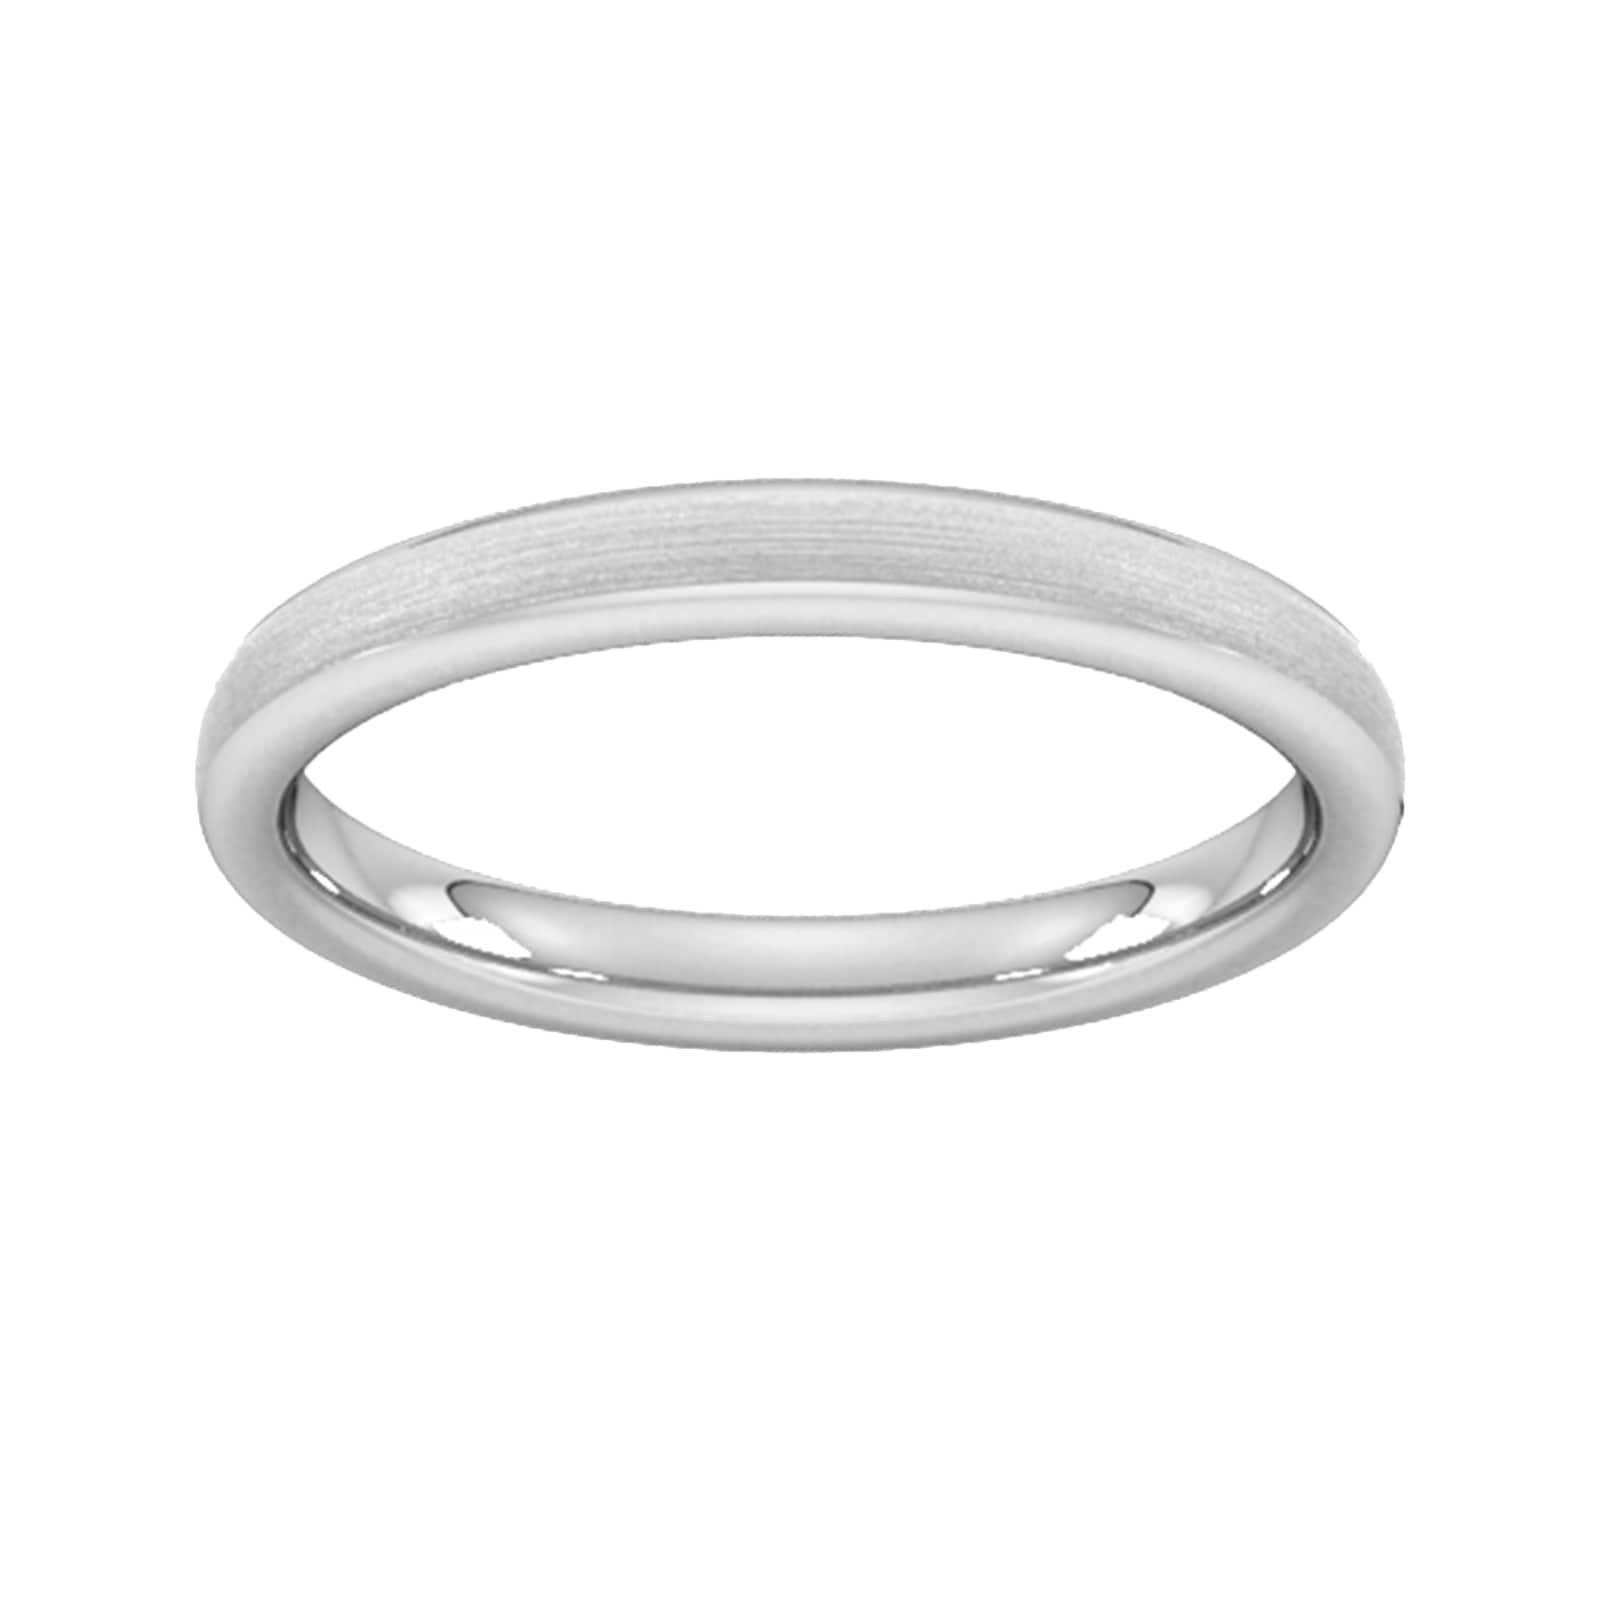 2.5mm Slight Court Extra Heavy Matt Finished Wedding Ring In 18 Carat White Gold - Ring Size H